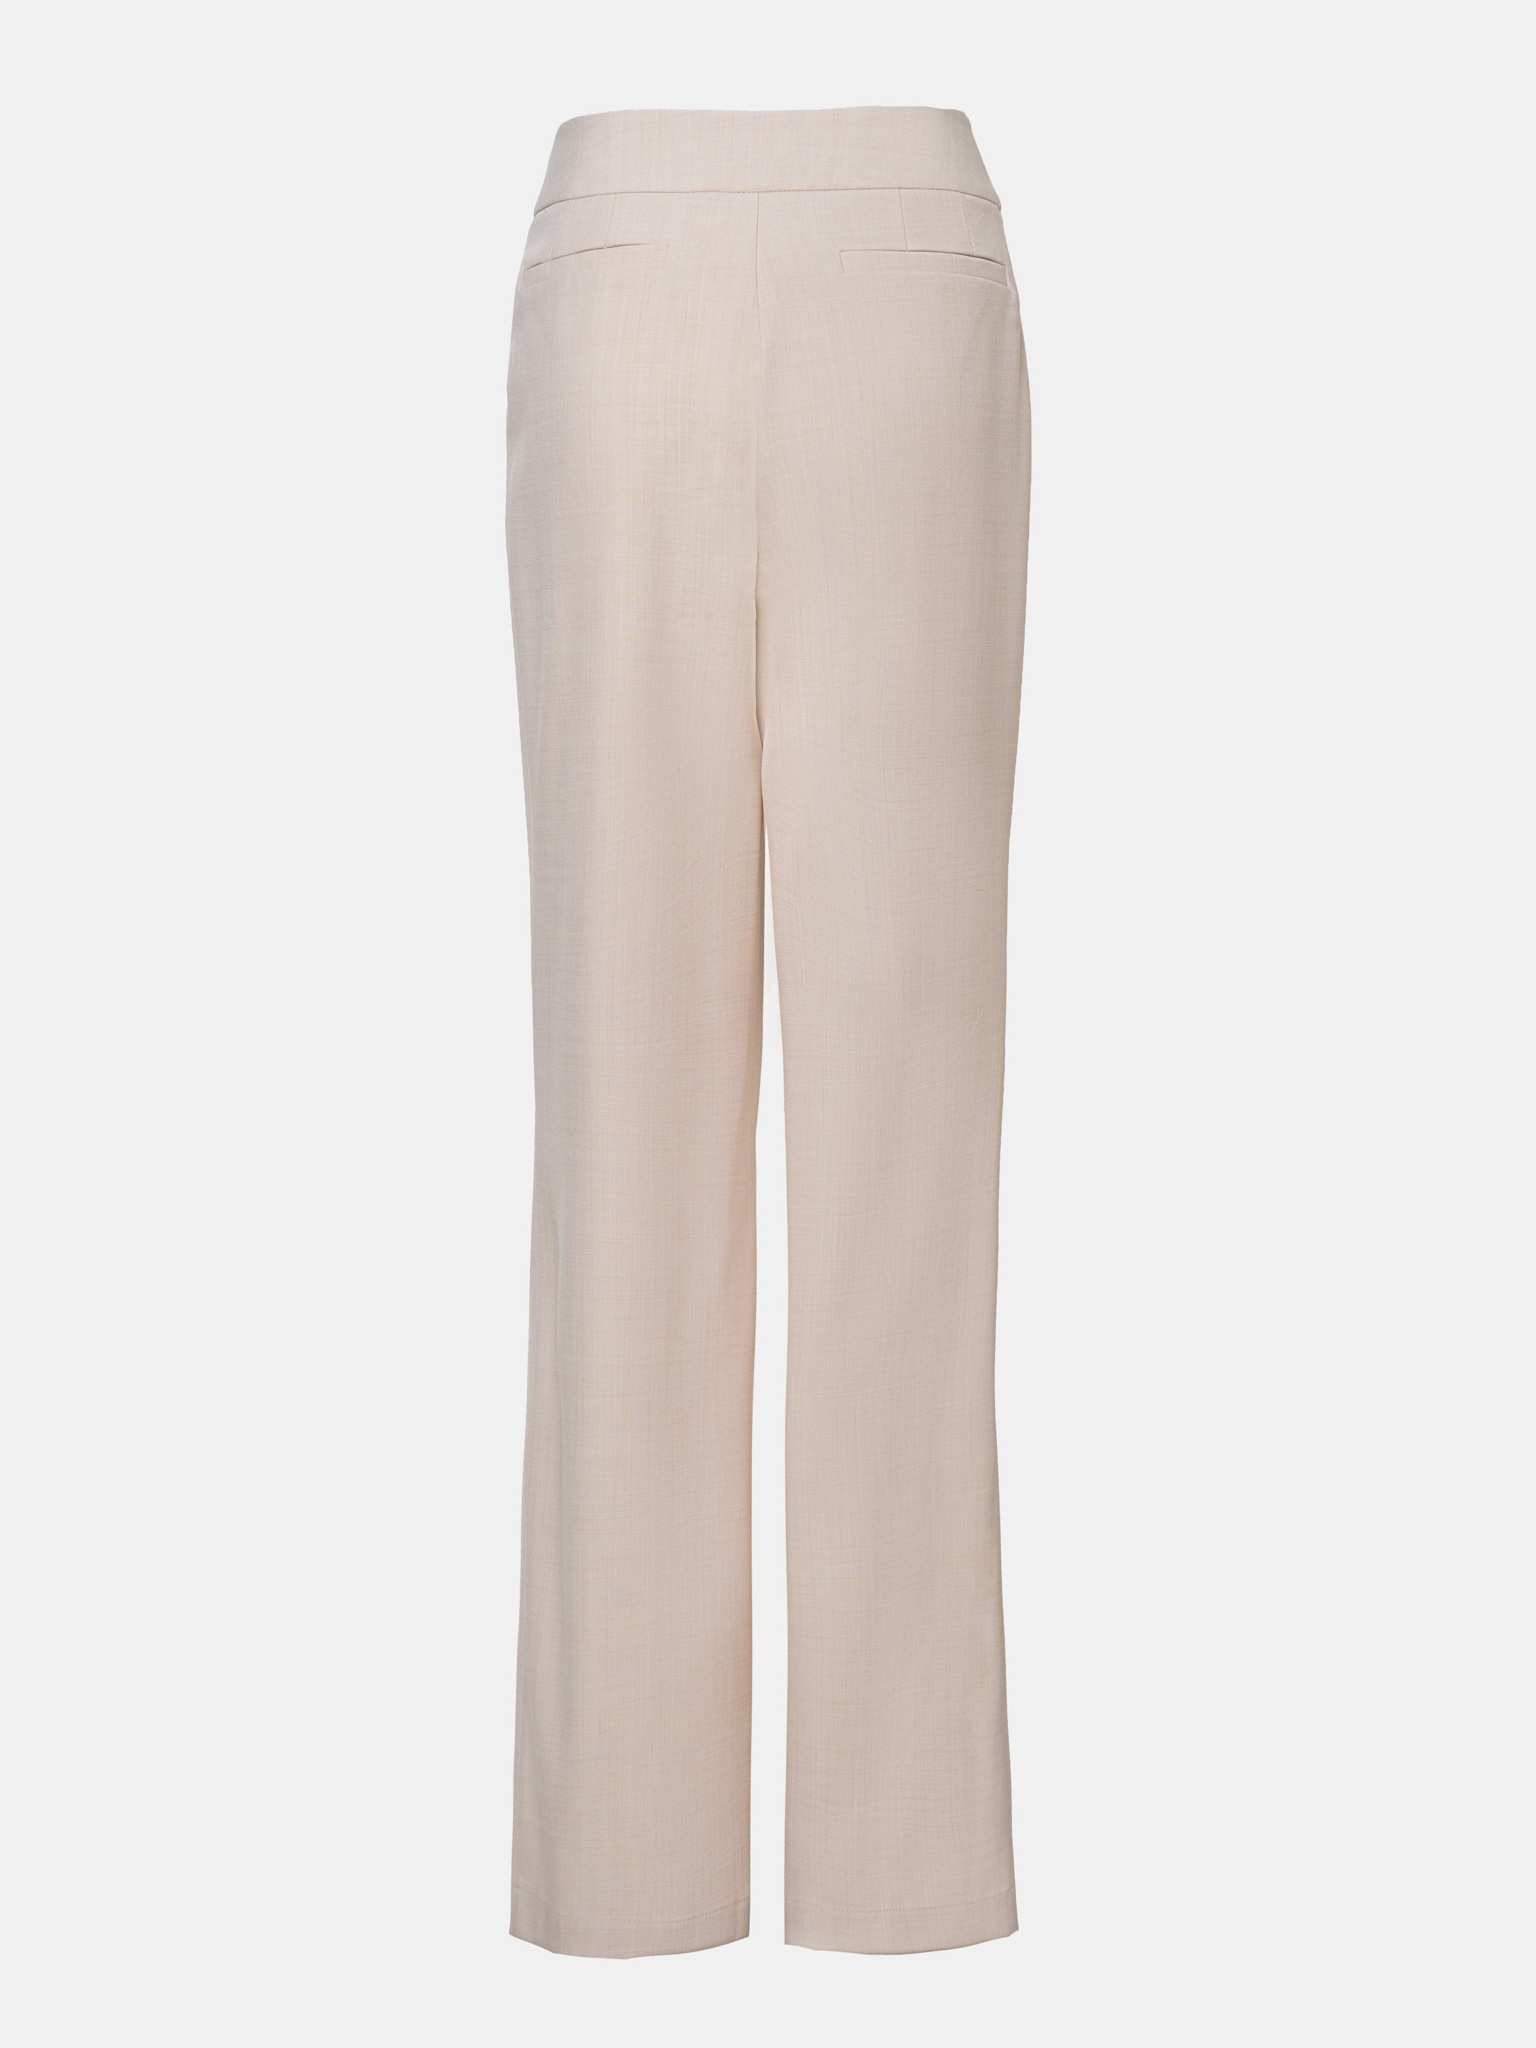 Loose-fitting trousers with a wide belt